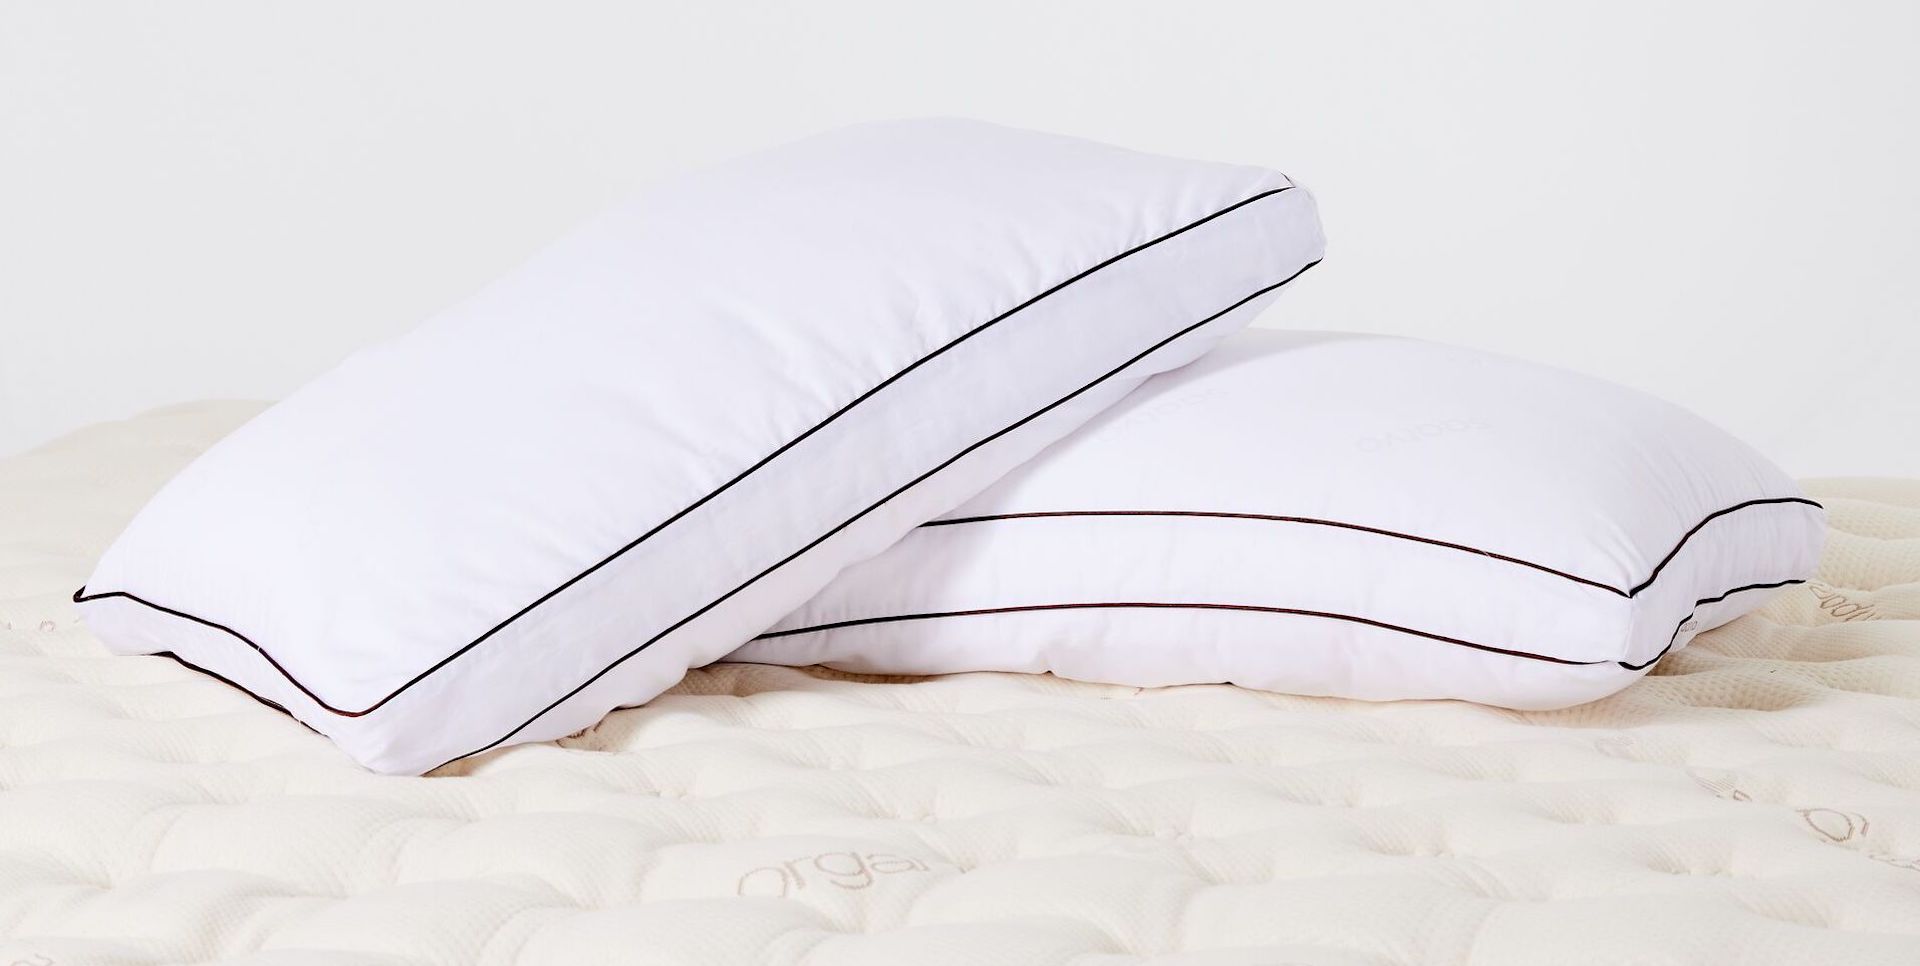 Sleeping Without a Pillow: Is It Good or Bad?